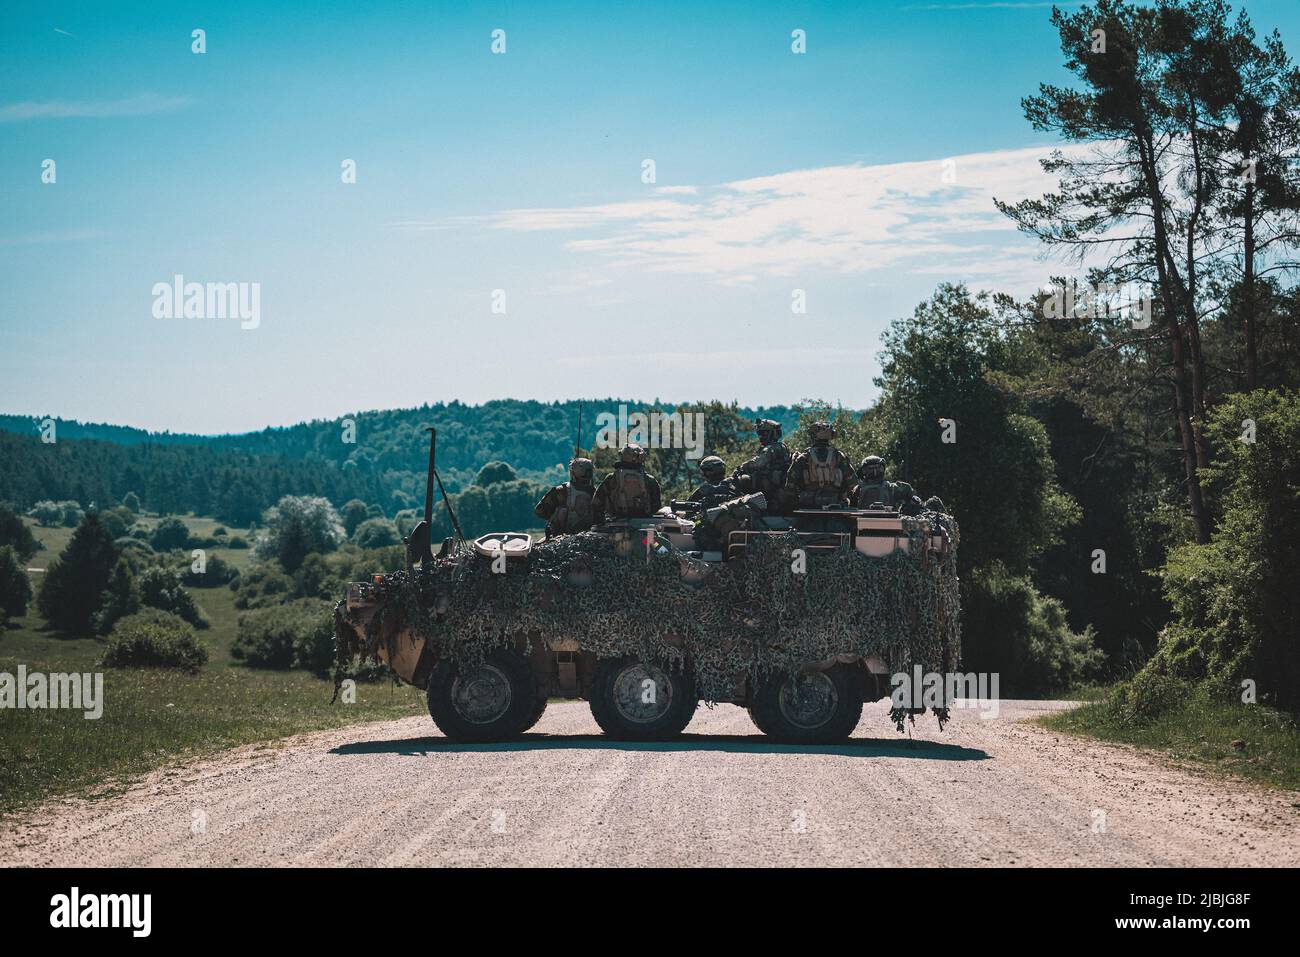 Belgian Armed Forces soldiers assigned to ISTAR COY observe the opposing forces from their Pandur Armored Personnel Carrier during Exercise Combined Resolve 17 (CbR 17) at the Joint Multinational Readiness Center in Hohenfels, Germany, on June 3, 2022. CbR 17 is a U.S. Army exercise consisting of 5,600 service members, NATO Allies, and partners from over 10 countries, and is designed to assess units' abilities to conduct operations in a multi-domain battle space. (U.S. Army photo by Staff Sgt. Dana Clarke) Stock Photo